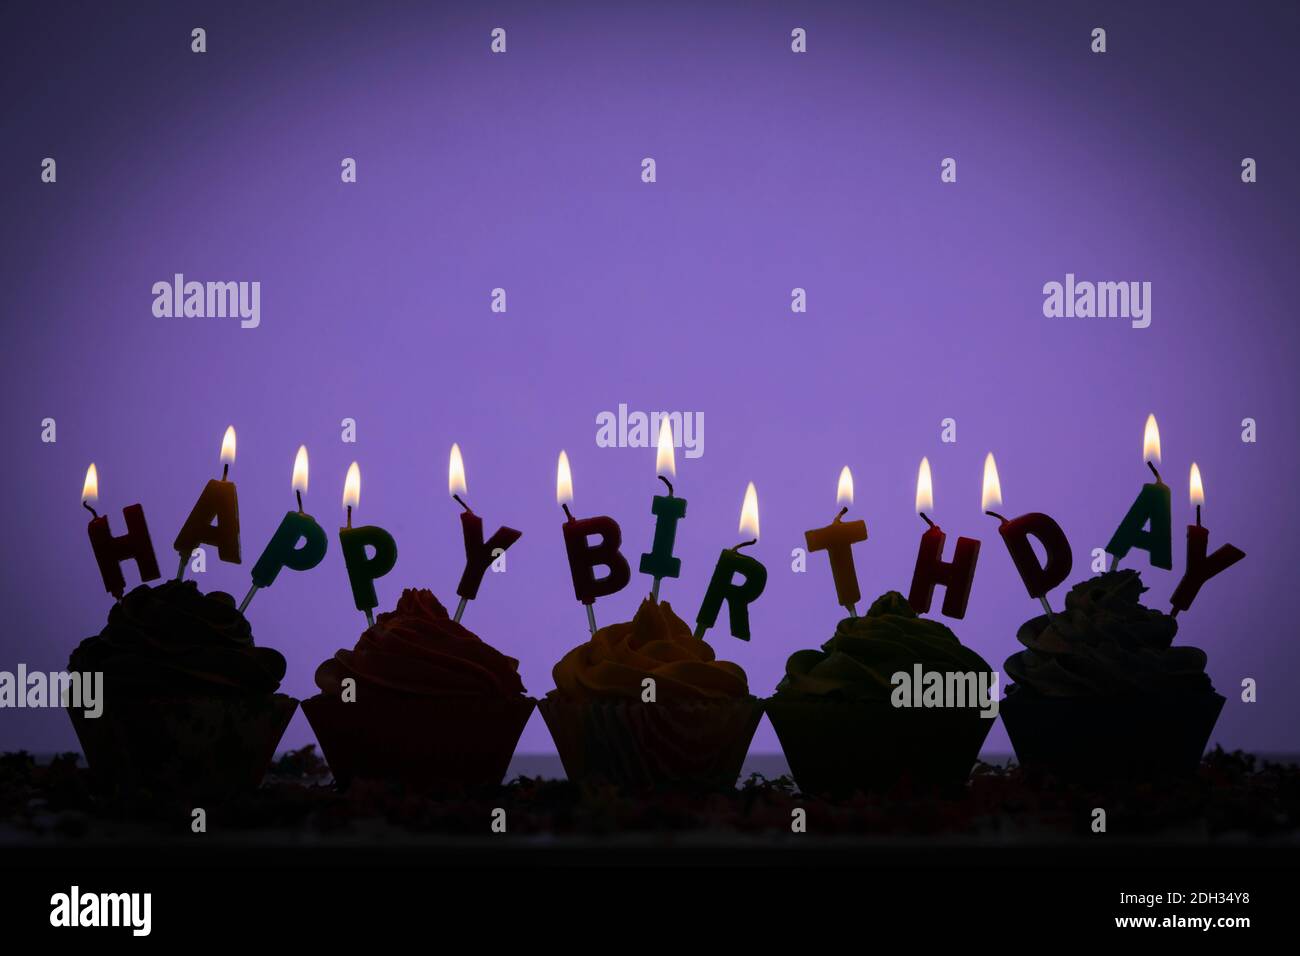 Silhouette of birthday cupcakes in a row Stock Photo